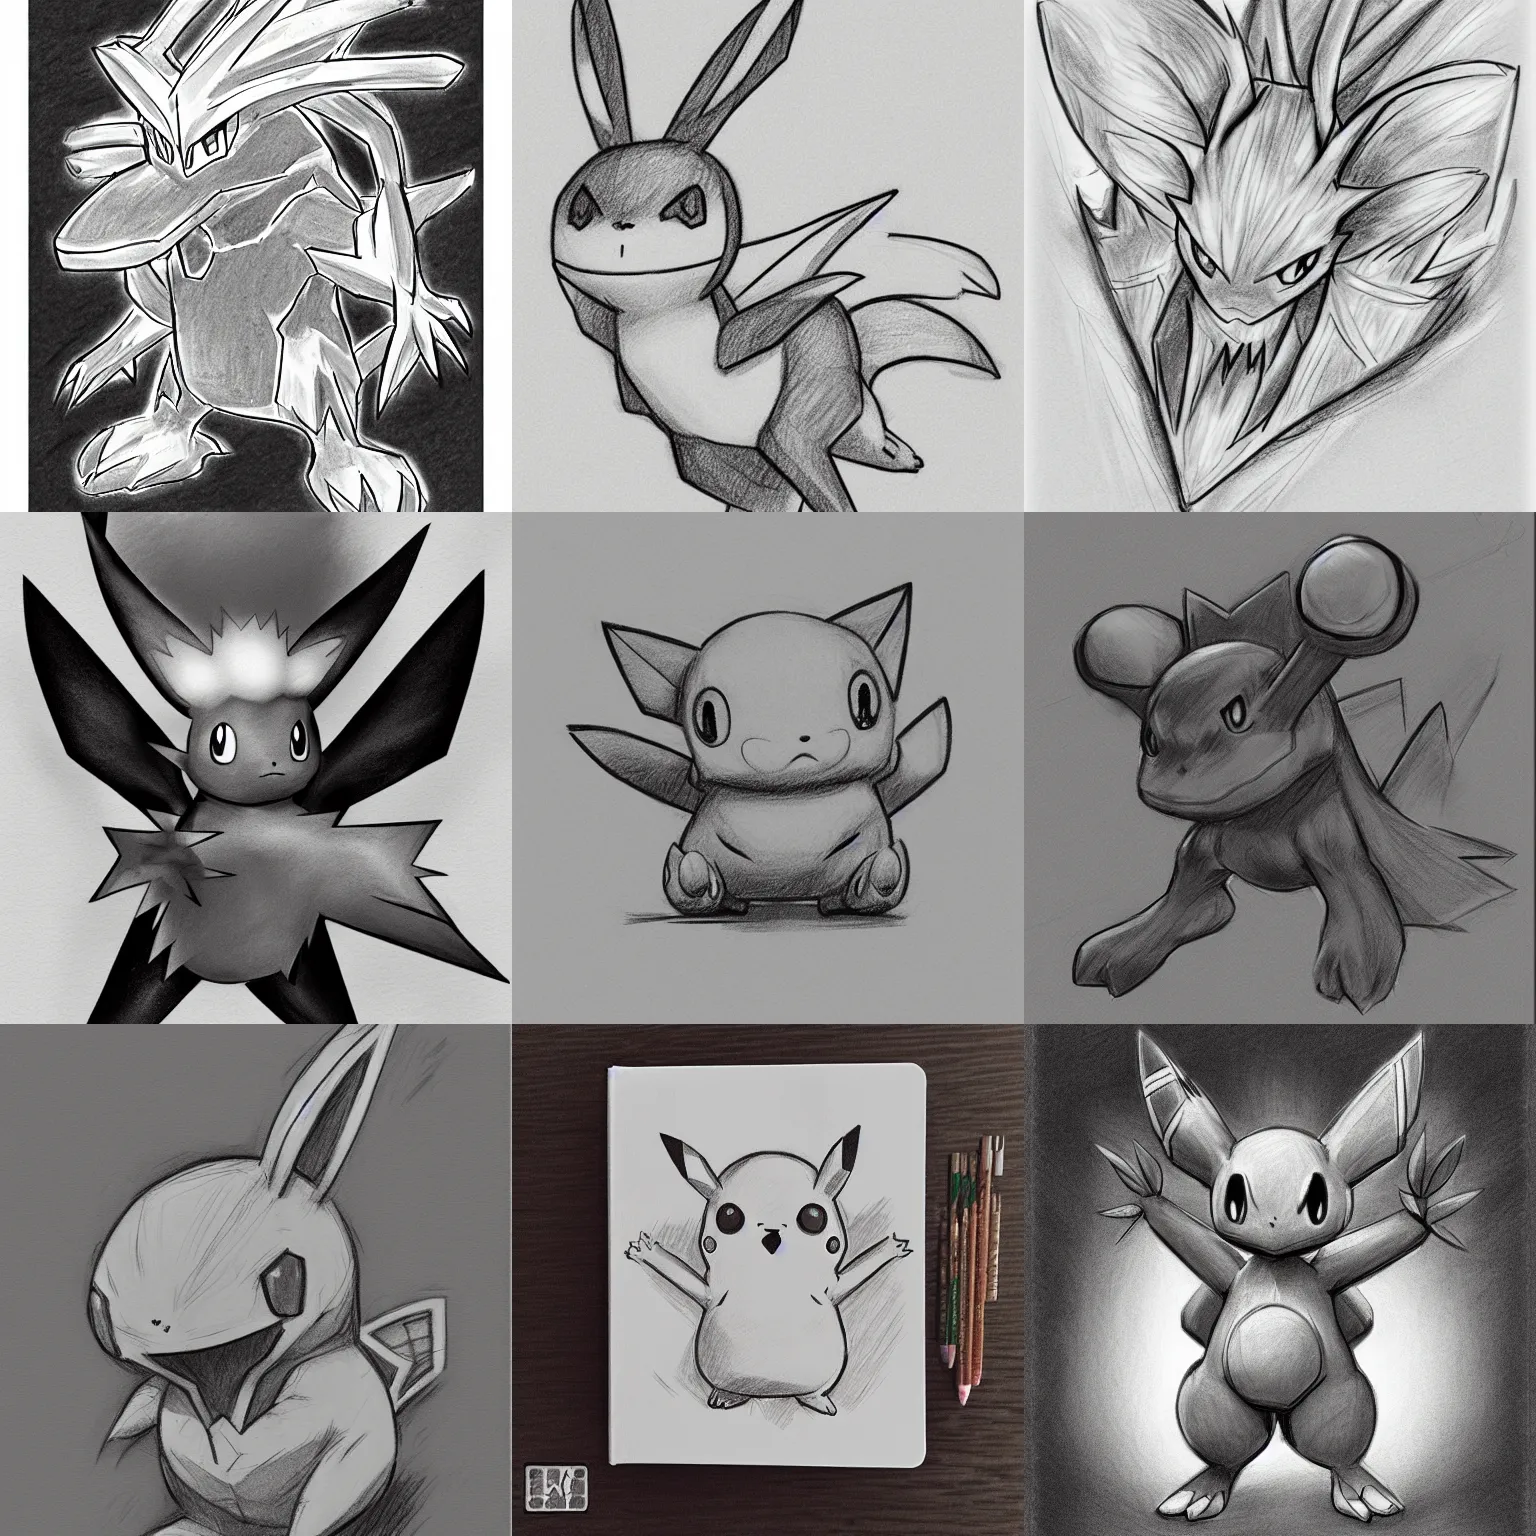 How To Draw Pokemon Easy, Step by Step, Drawing Guide, by Dawn - DragoArt